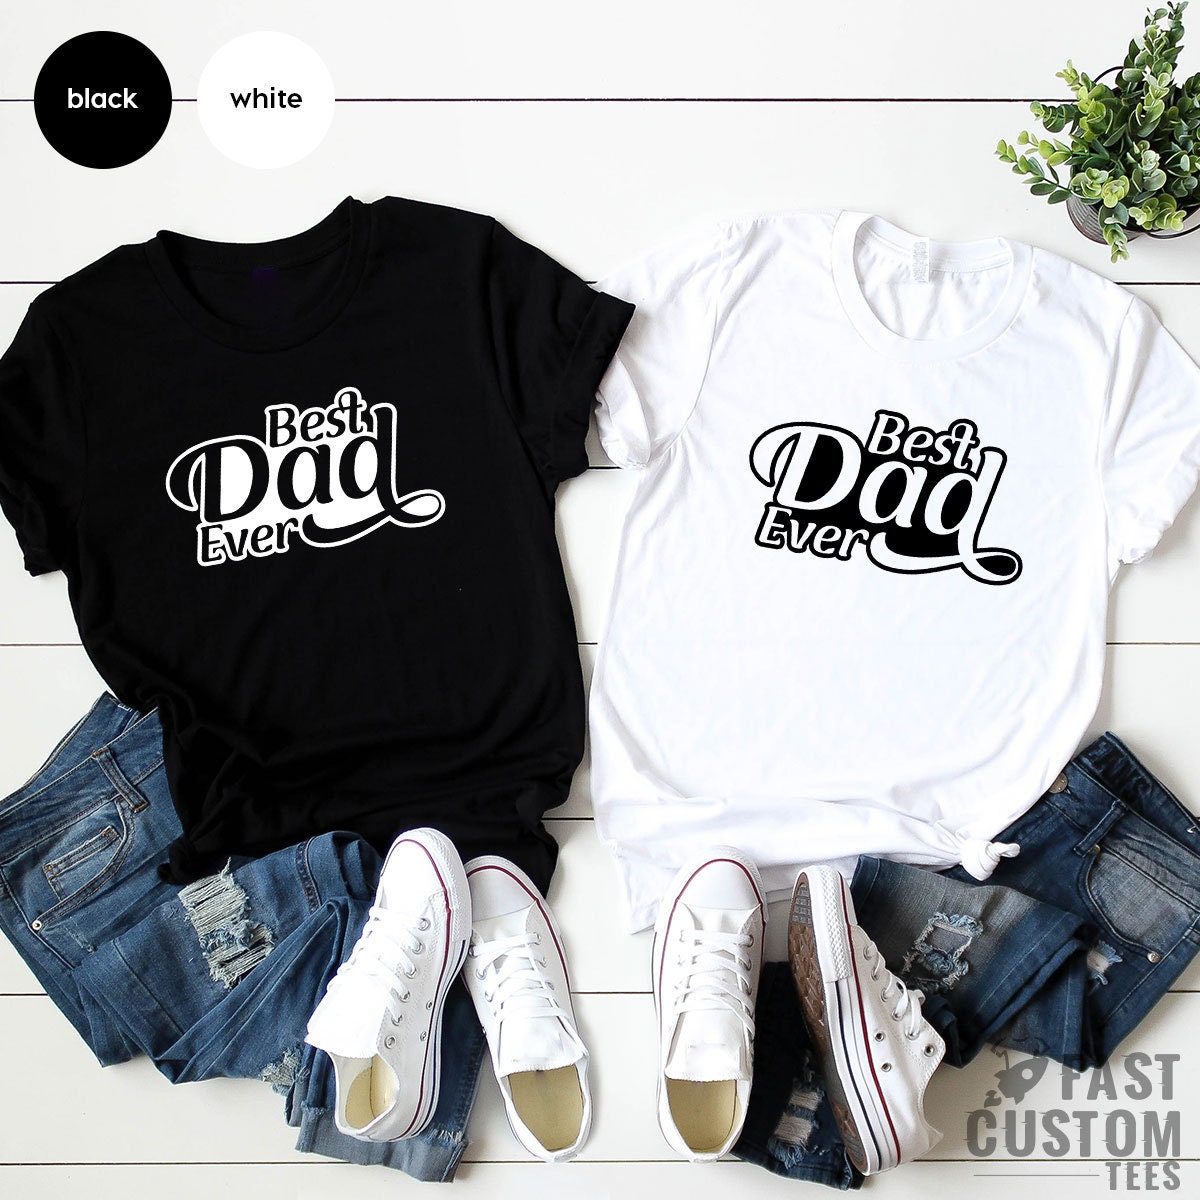 Dad Shirt, Dad Gift, Gift For Dad, Fathers Day Shirt, Fathers Day Gift, New Dad Gift, Best Dad Ever, Best Dad Shirt, Dad To Be Shirt - Fastdeliverytees.com